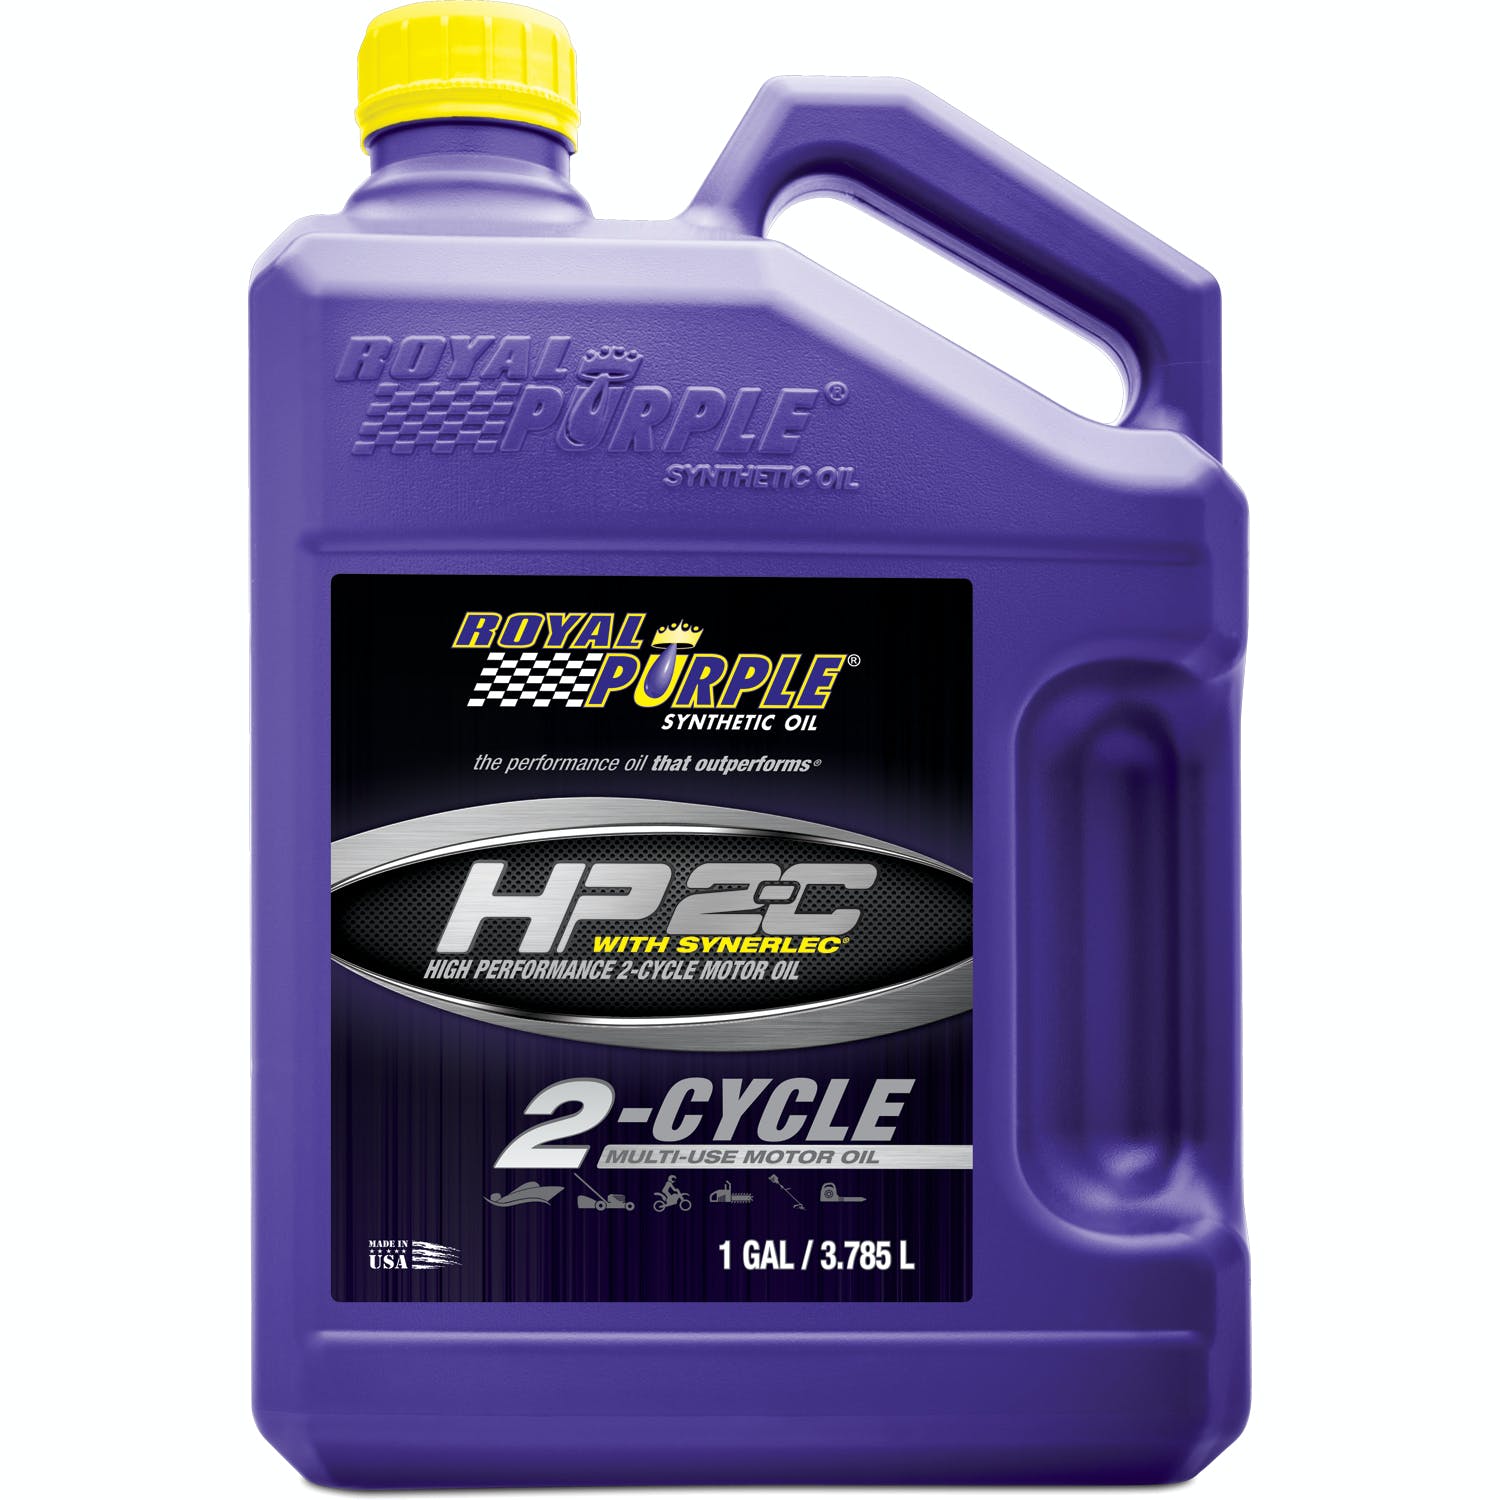 Royal Purple 43311 HP 2C Two-Cycle Engine Oil Gal Bottle